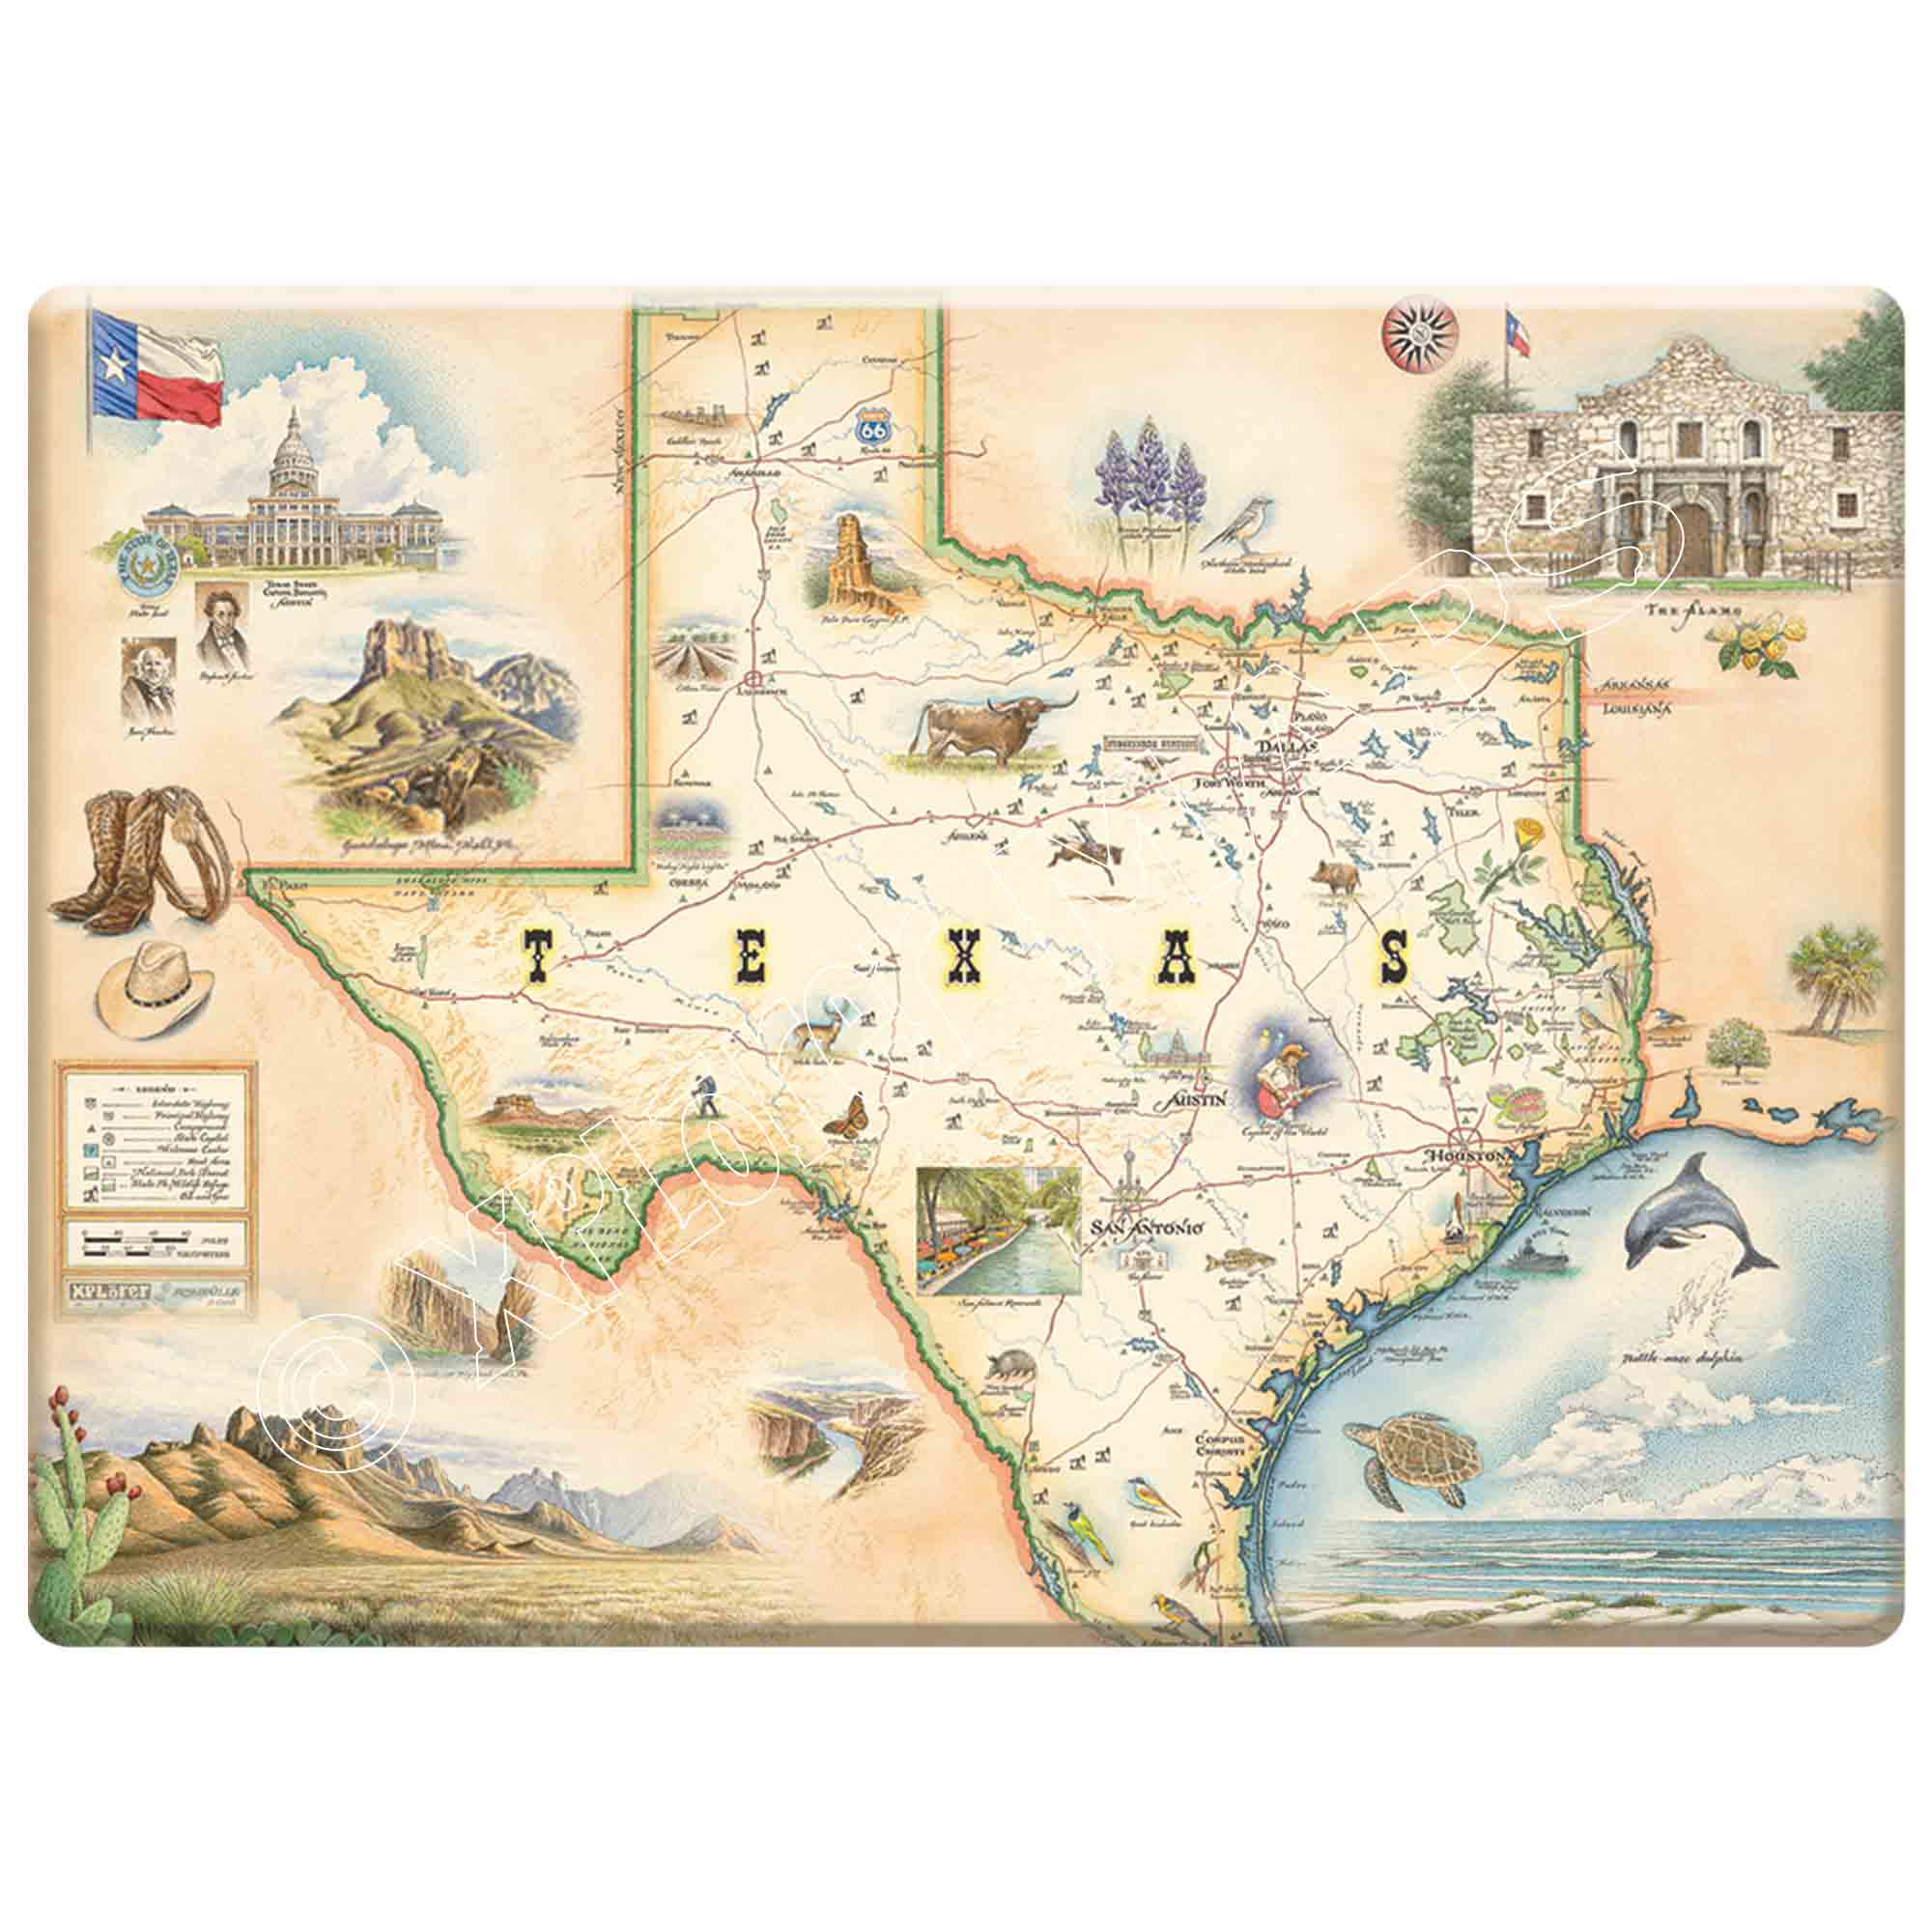 Texas Magnet by Xplorer Maps. The magnet is featuring cities like Dallas, Houston, San Antonio, Austin, the Alamo and cowboys . Flora and fauna like Longhorn, birds, dolphins, turtles, cactus, and trees. 